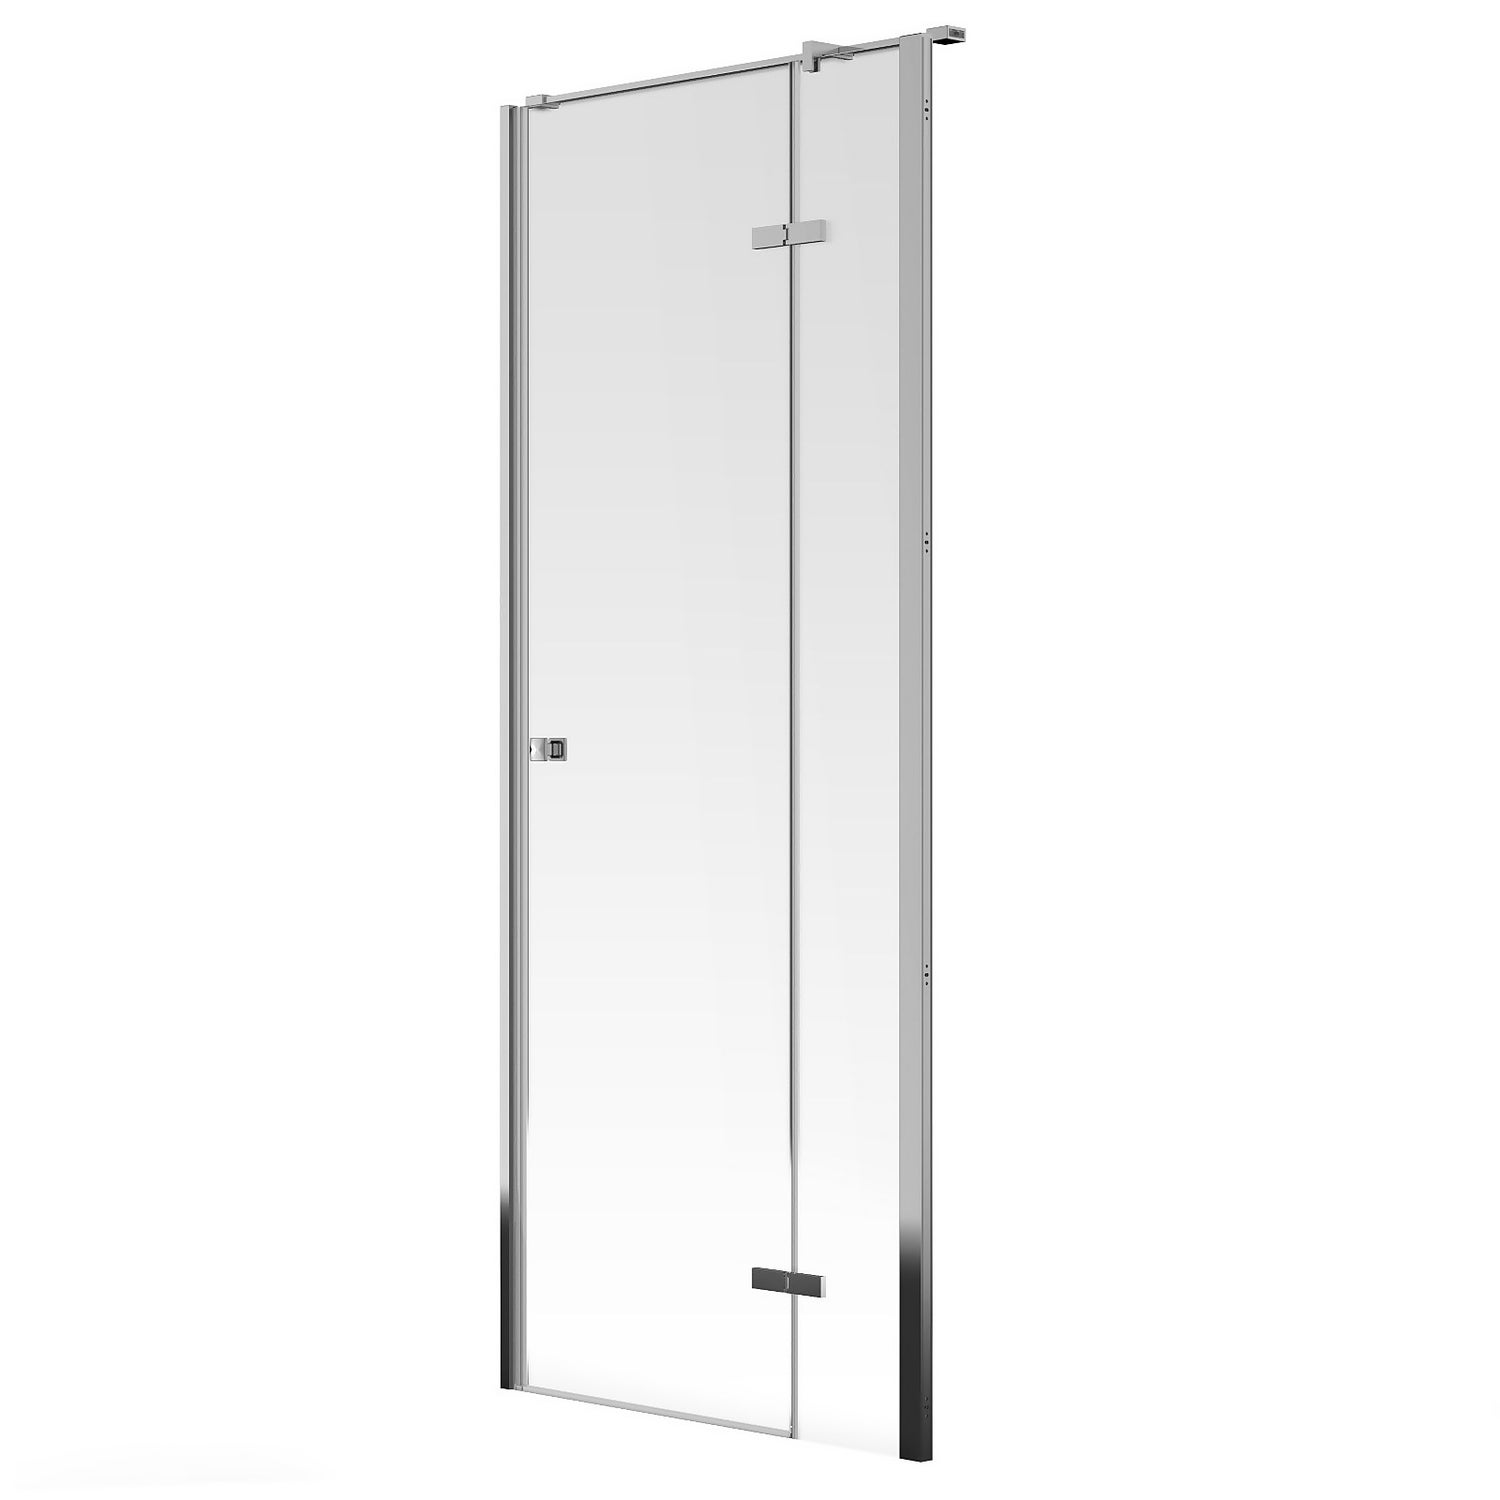 Pearl 900mm Hinged Shower Enclosure Door - Right Hand